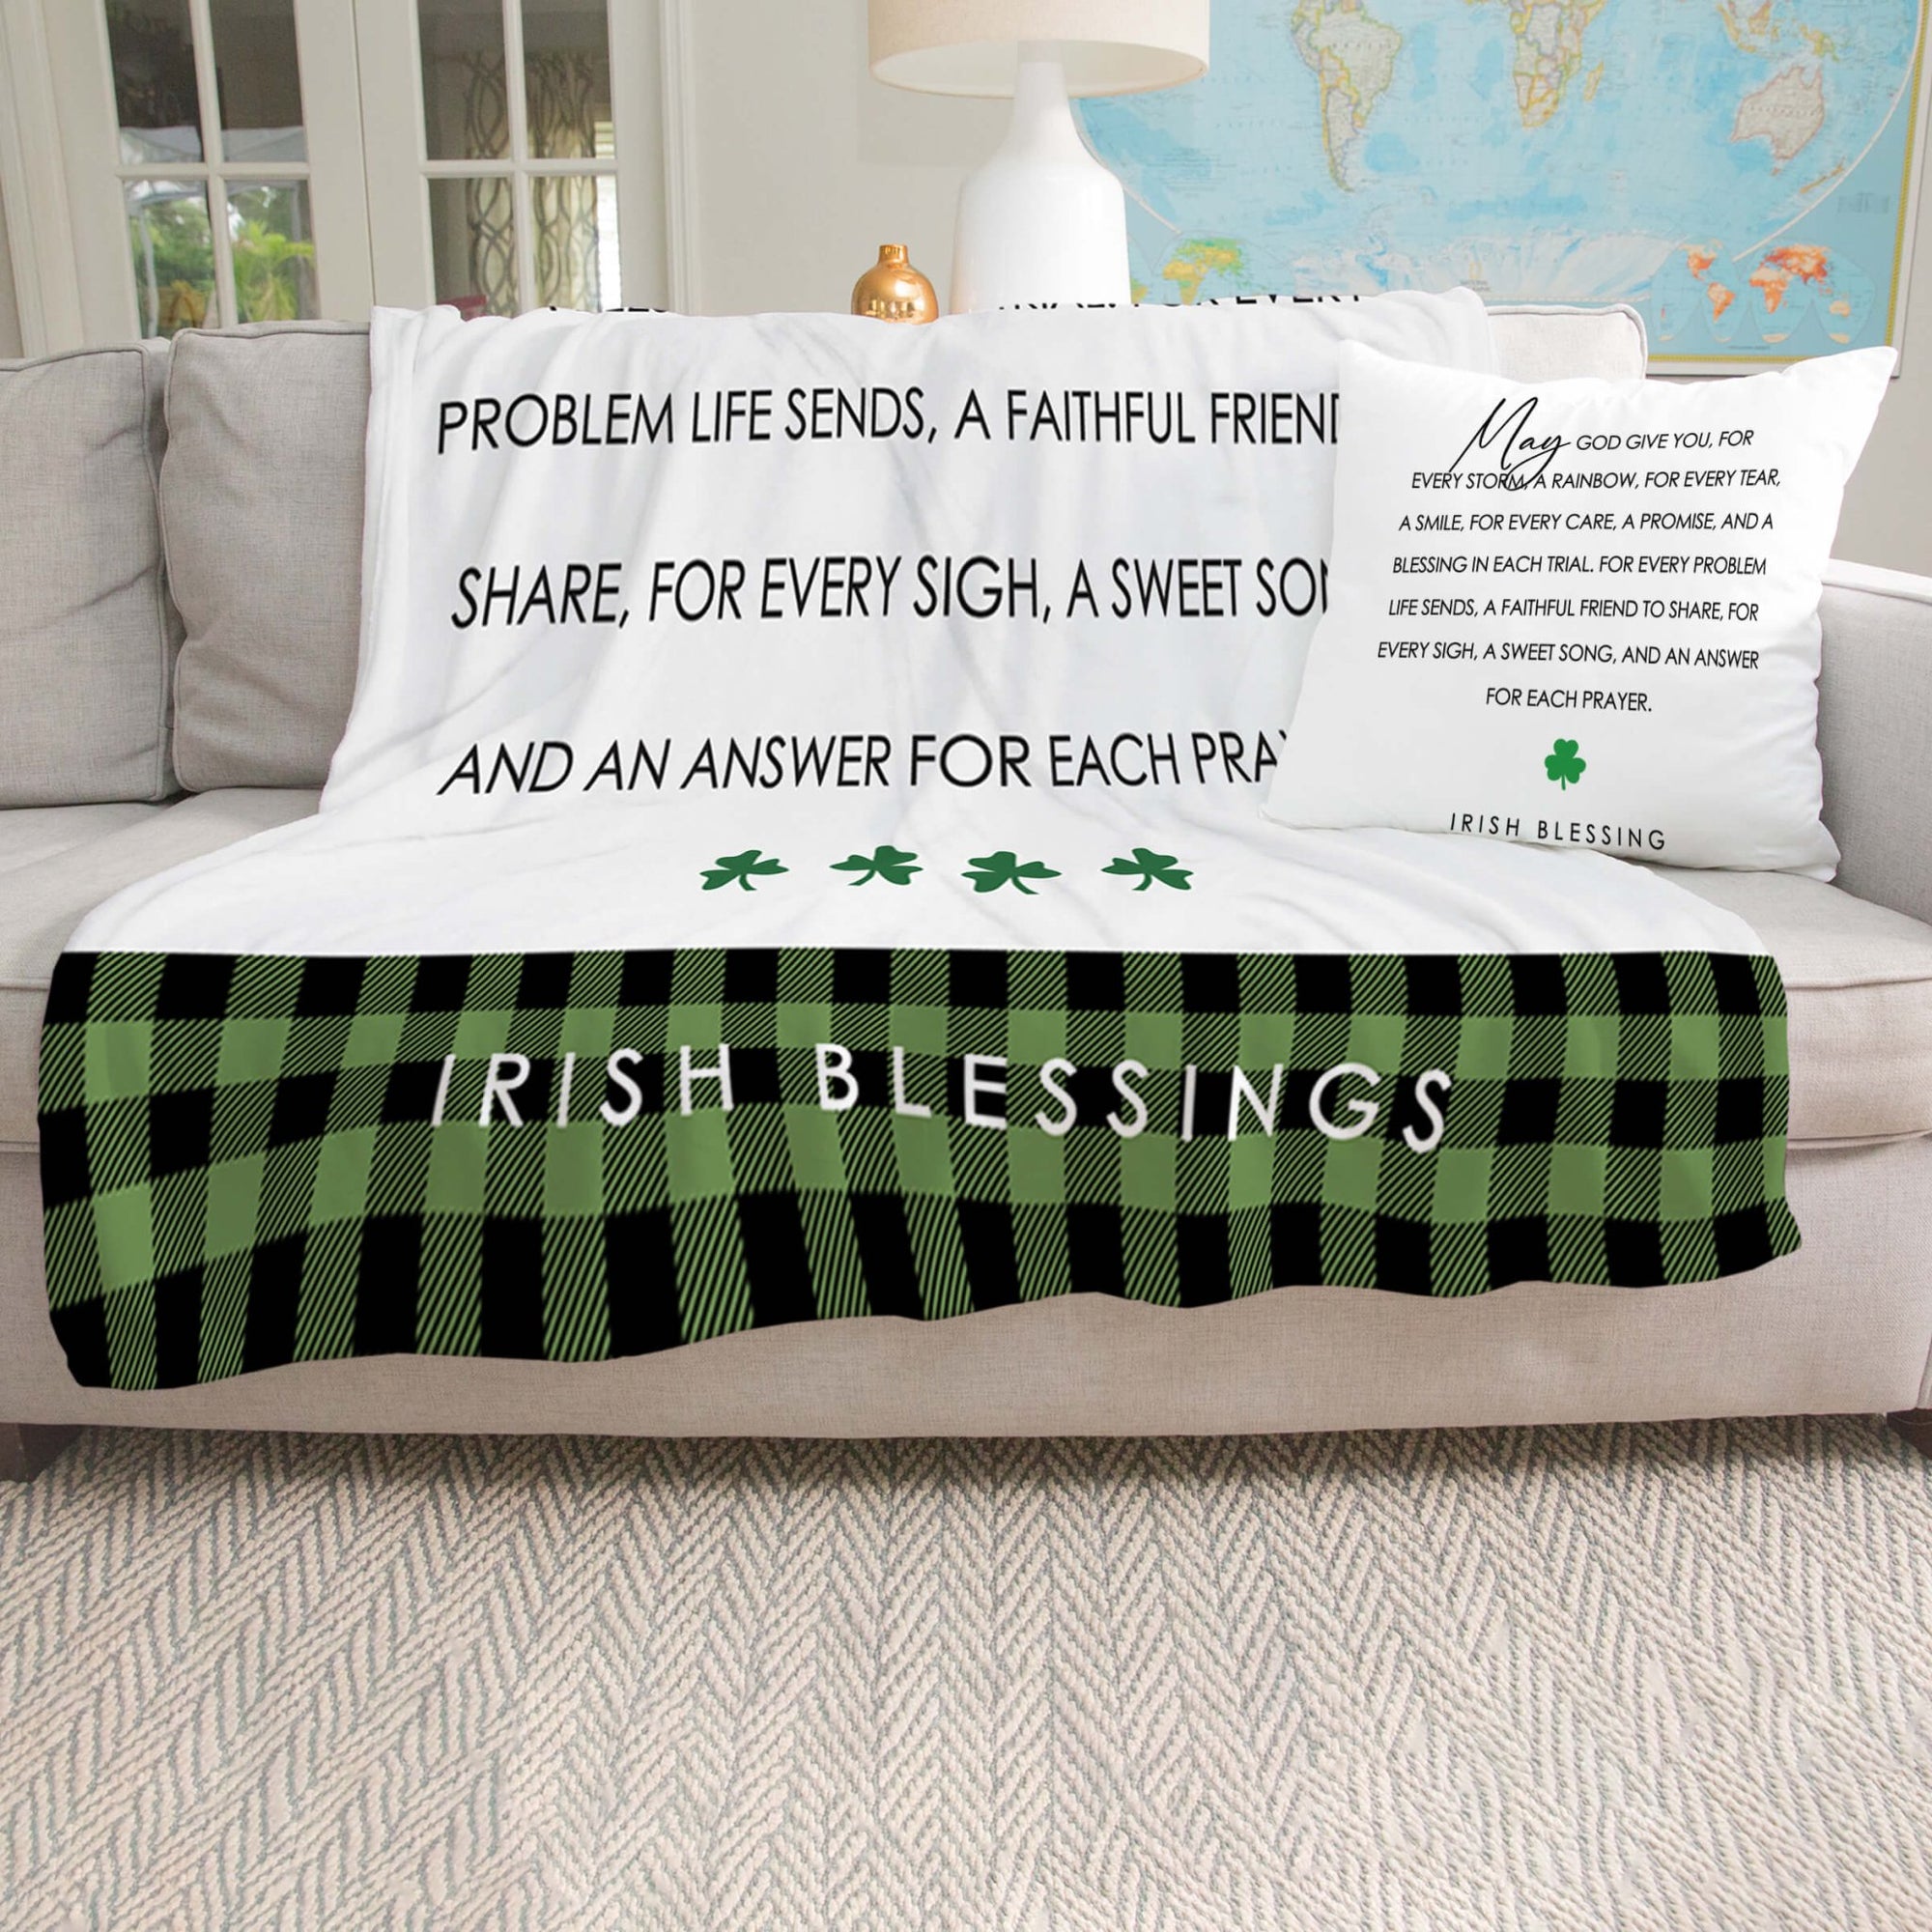 St. Patrick's Day Inspirational Soft And Lightweight Throw Blankets For Home Decor - May God Give You - LifeSong Milestones